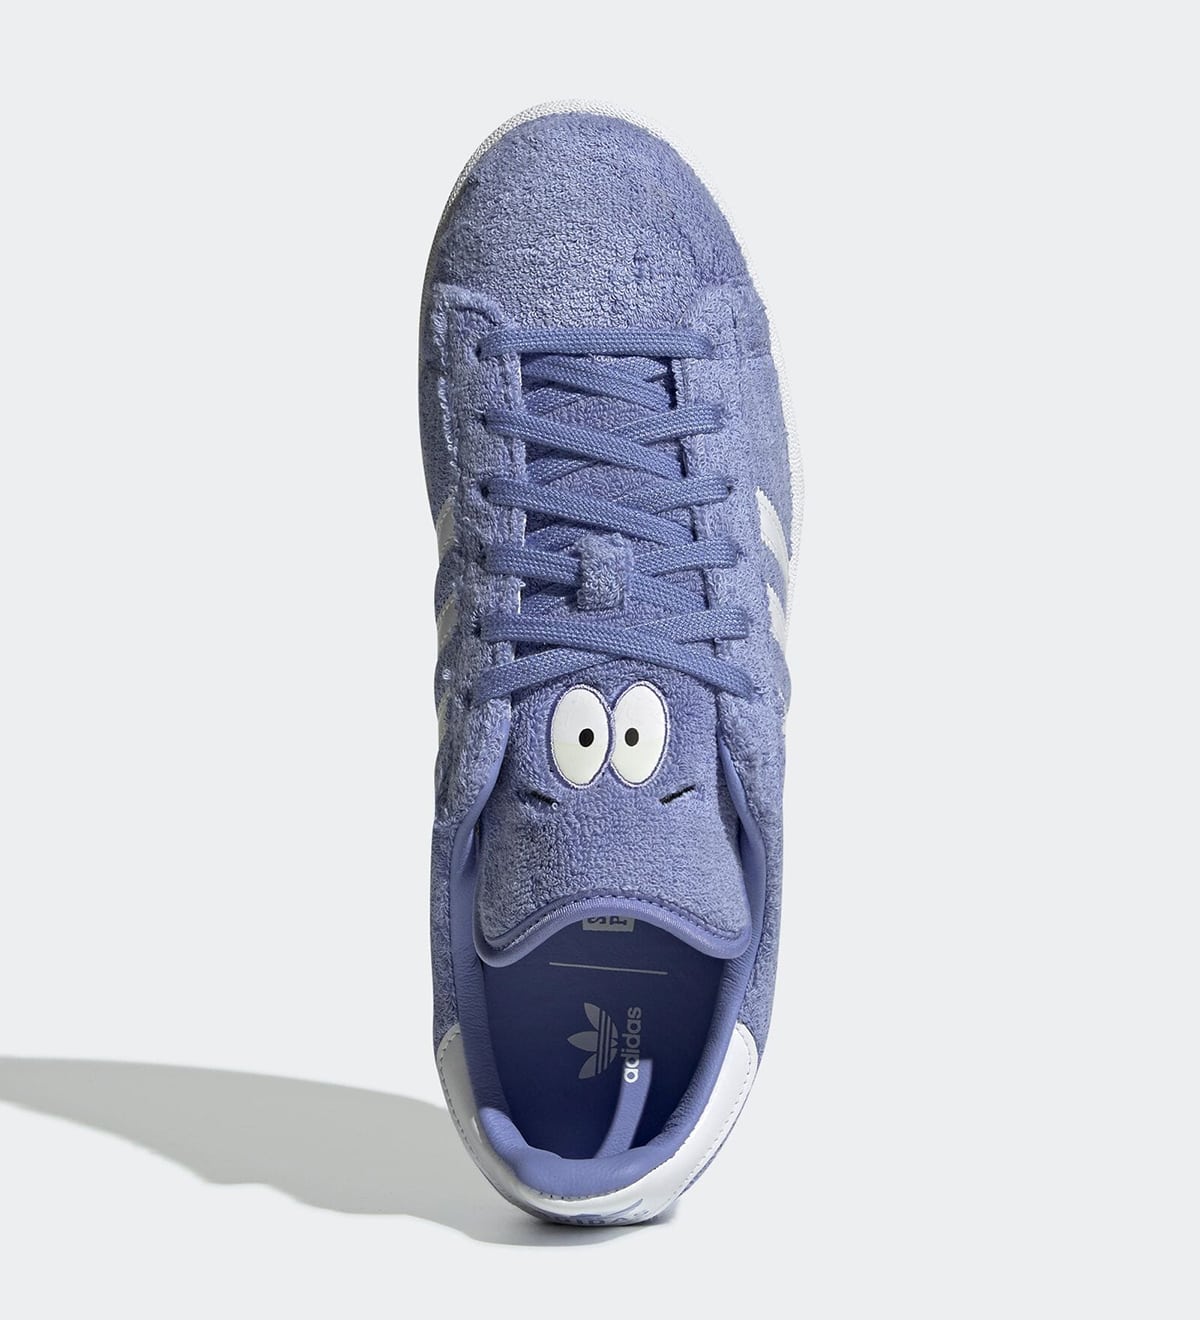 Where to Buy the South Park x adidas Campus 80s “Towelie” | HOUSE ...